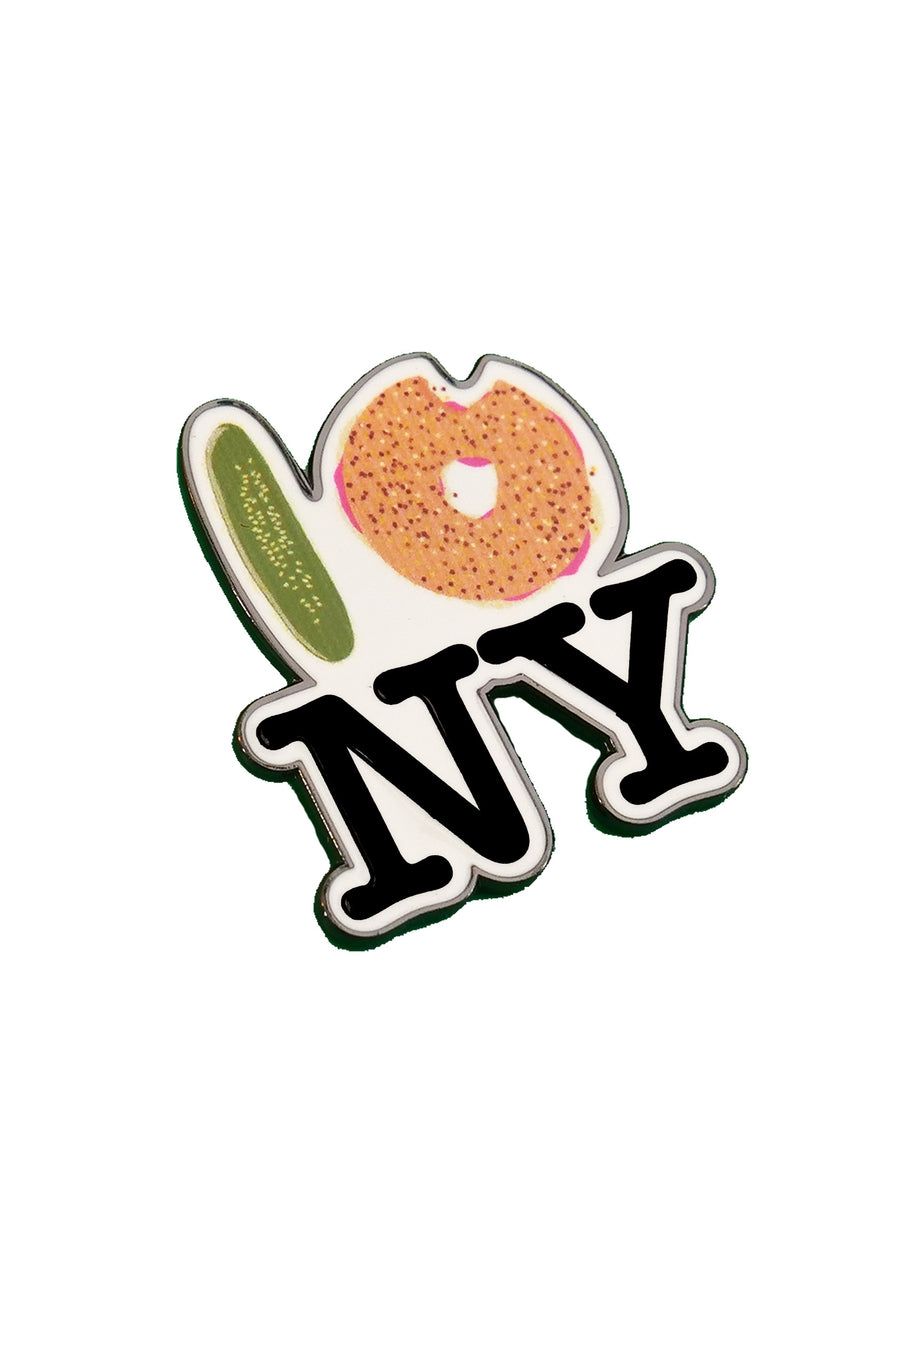 Pin on NYC